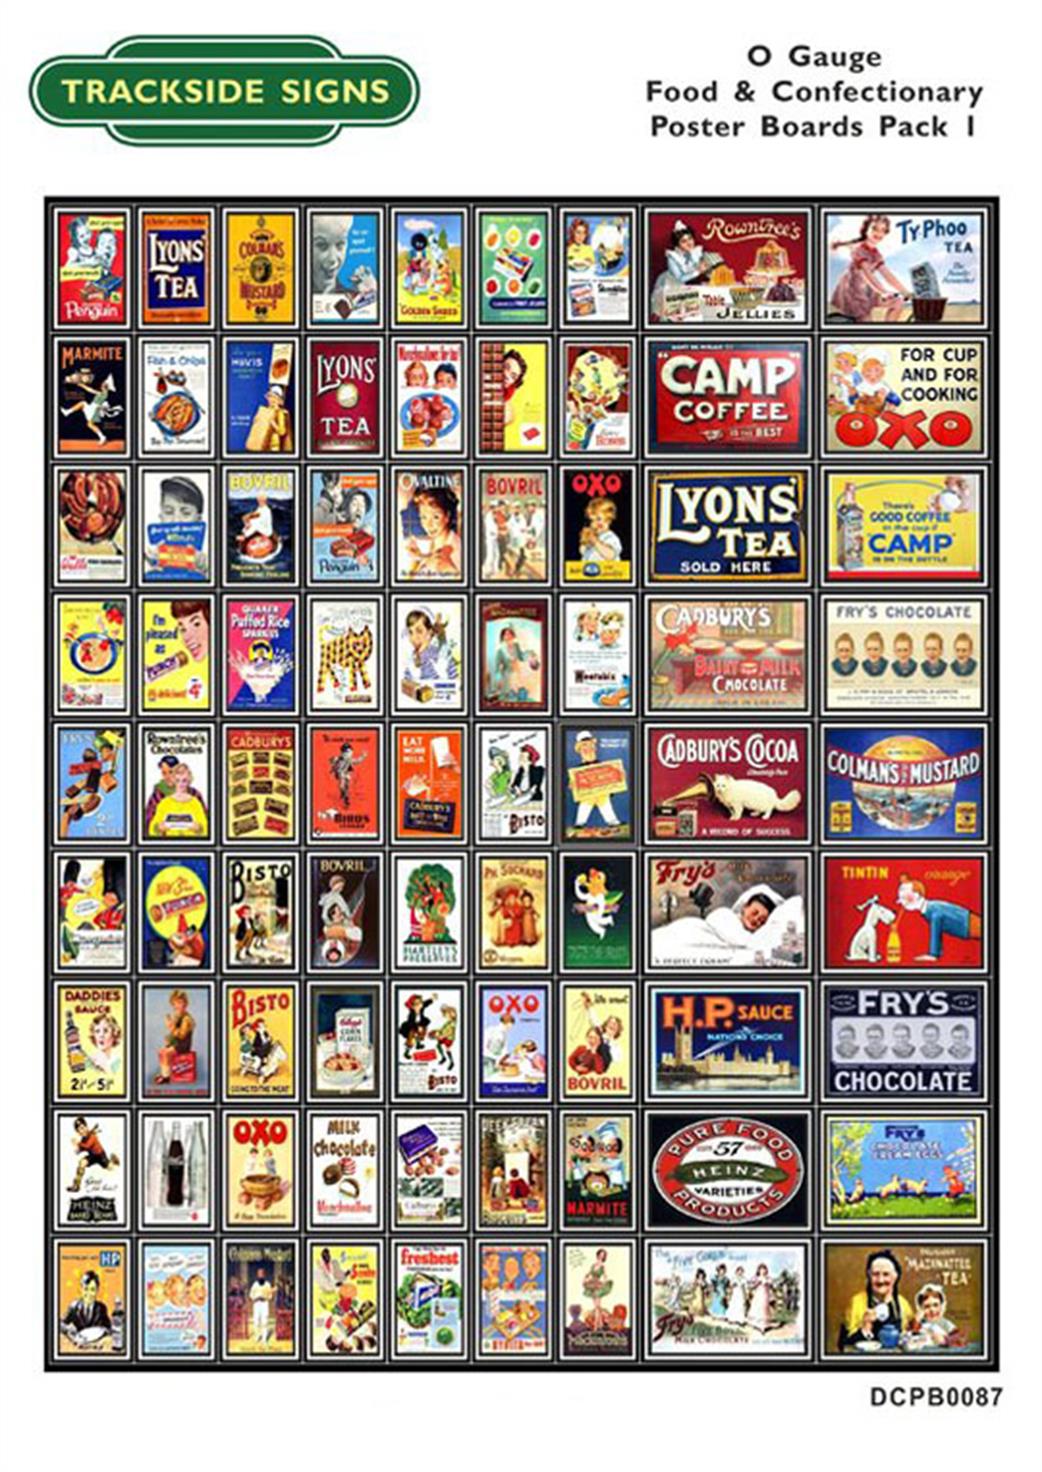 Trackside Signs DCPB0087 Food & Confectionary Poster Boards Pack 1 O Gauge